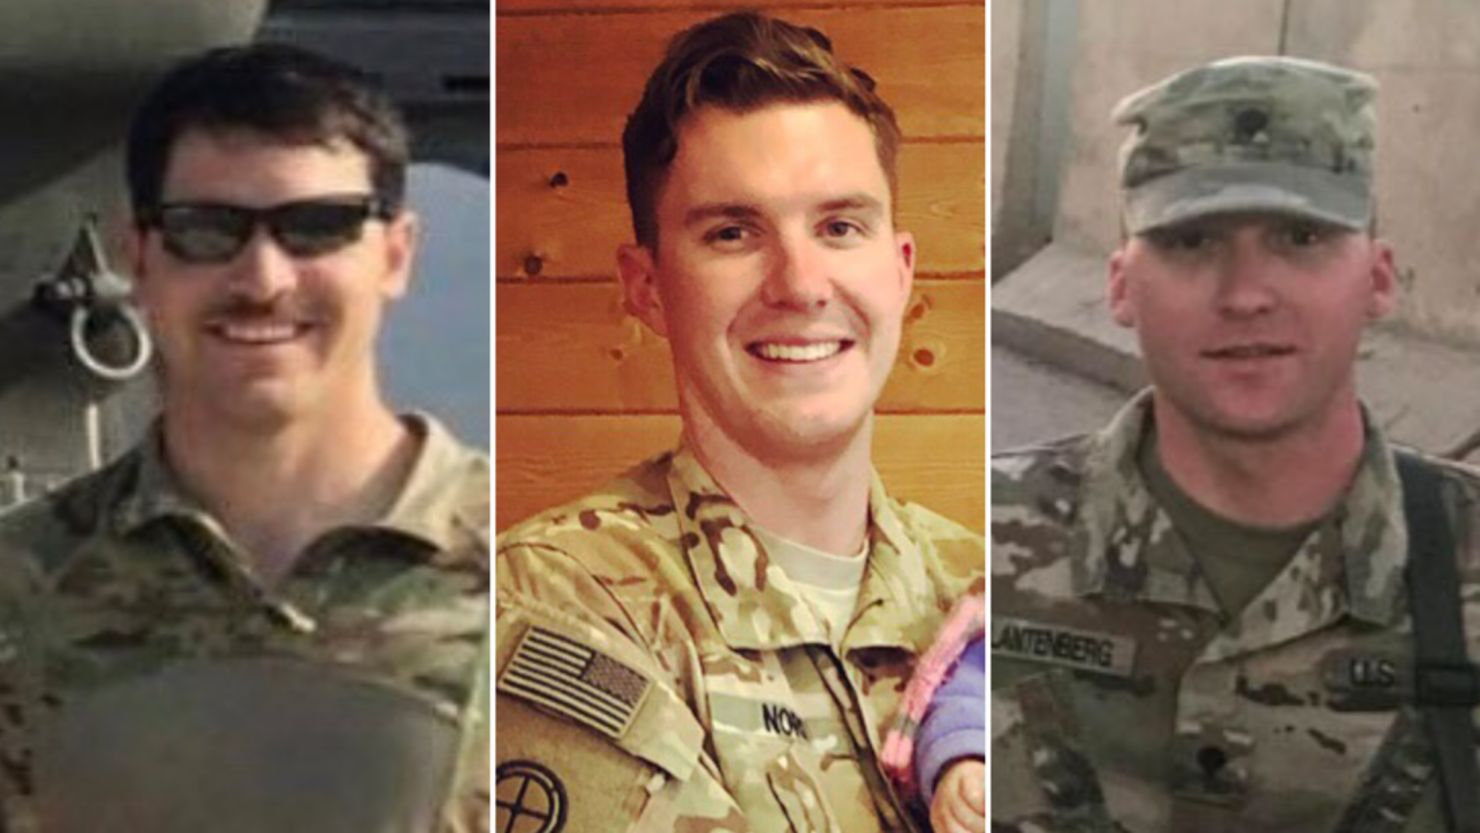 All three soldiers had returned in May from a nine-month deployment in the Middle East